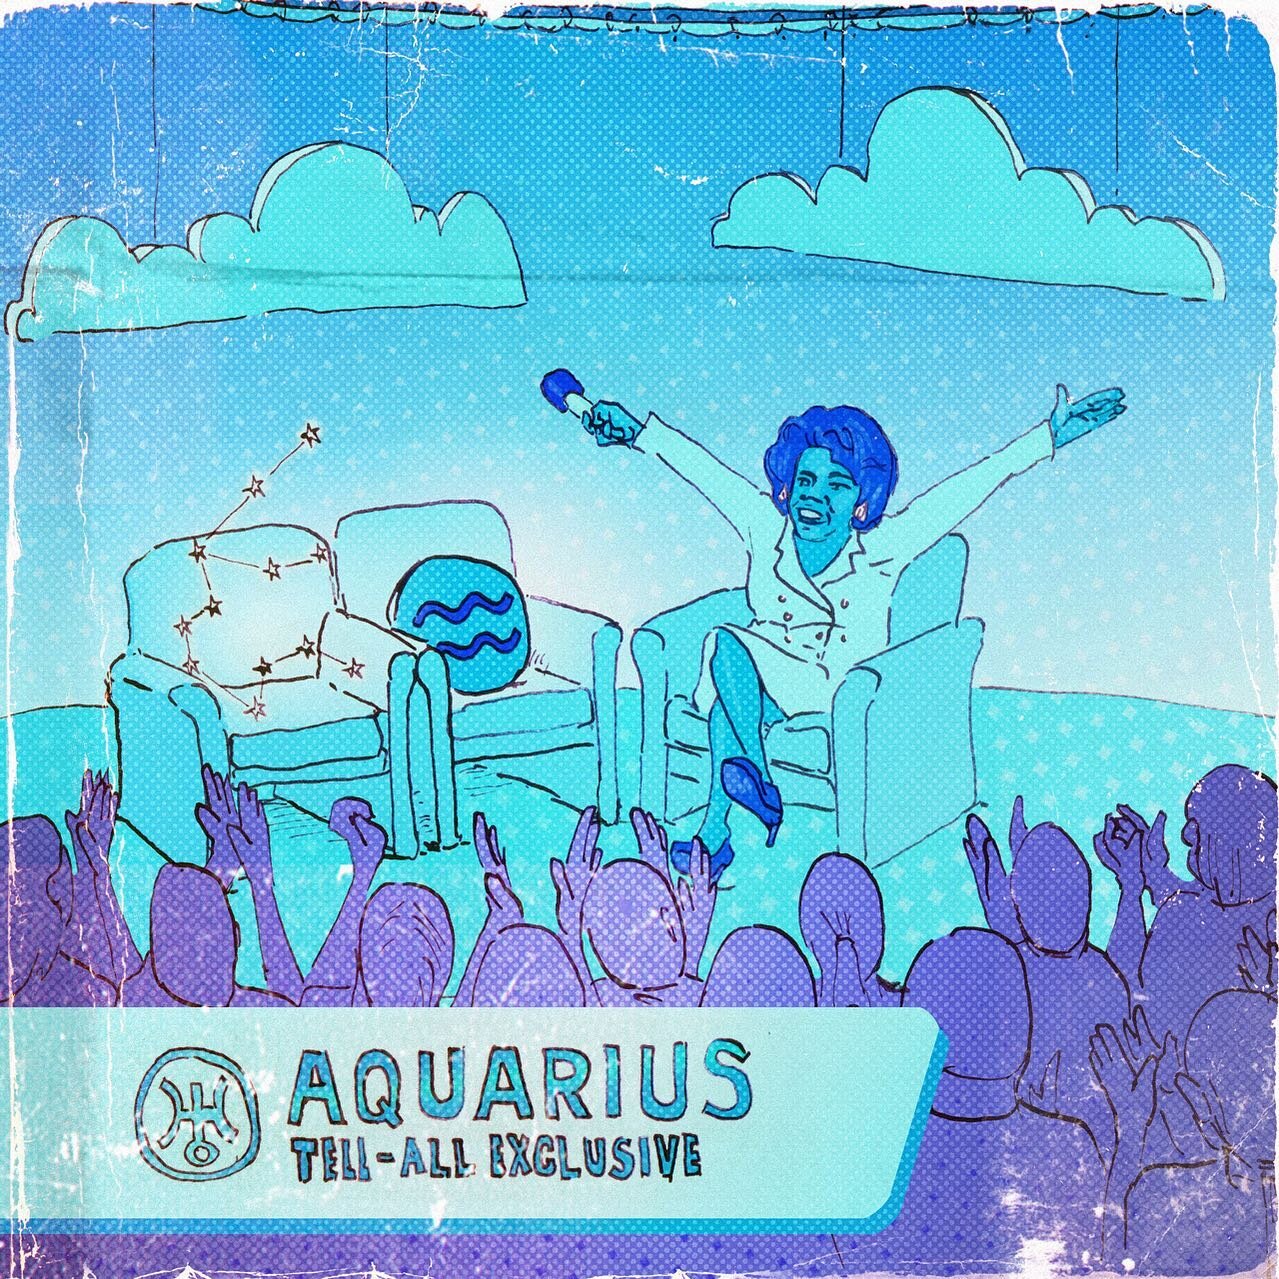 A freedom revolution! Your musical prescription for Aquarius season ✊🕊️
.
Aquarius is the true rebel &amp; humanitarian of the zodiac, using its visionary mind to progress us to a better future 🚀 This unconventional air sign is all about originalit